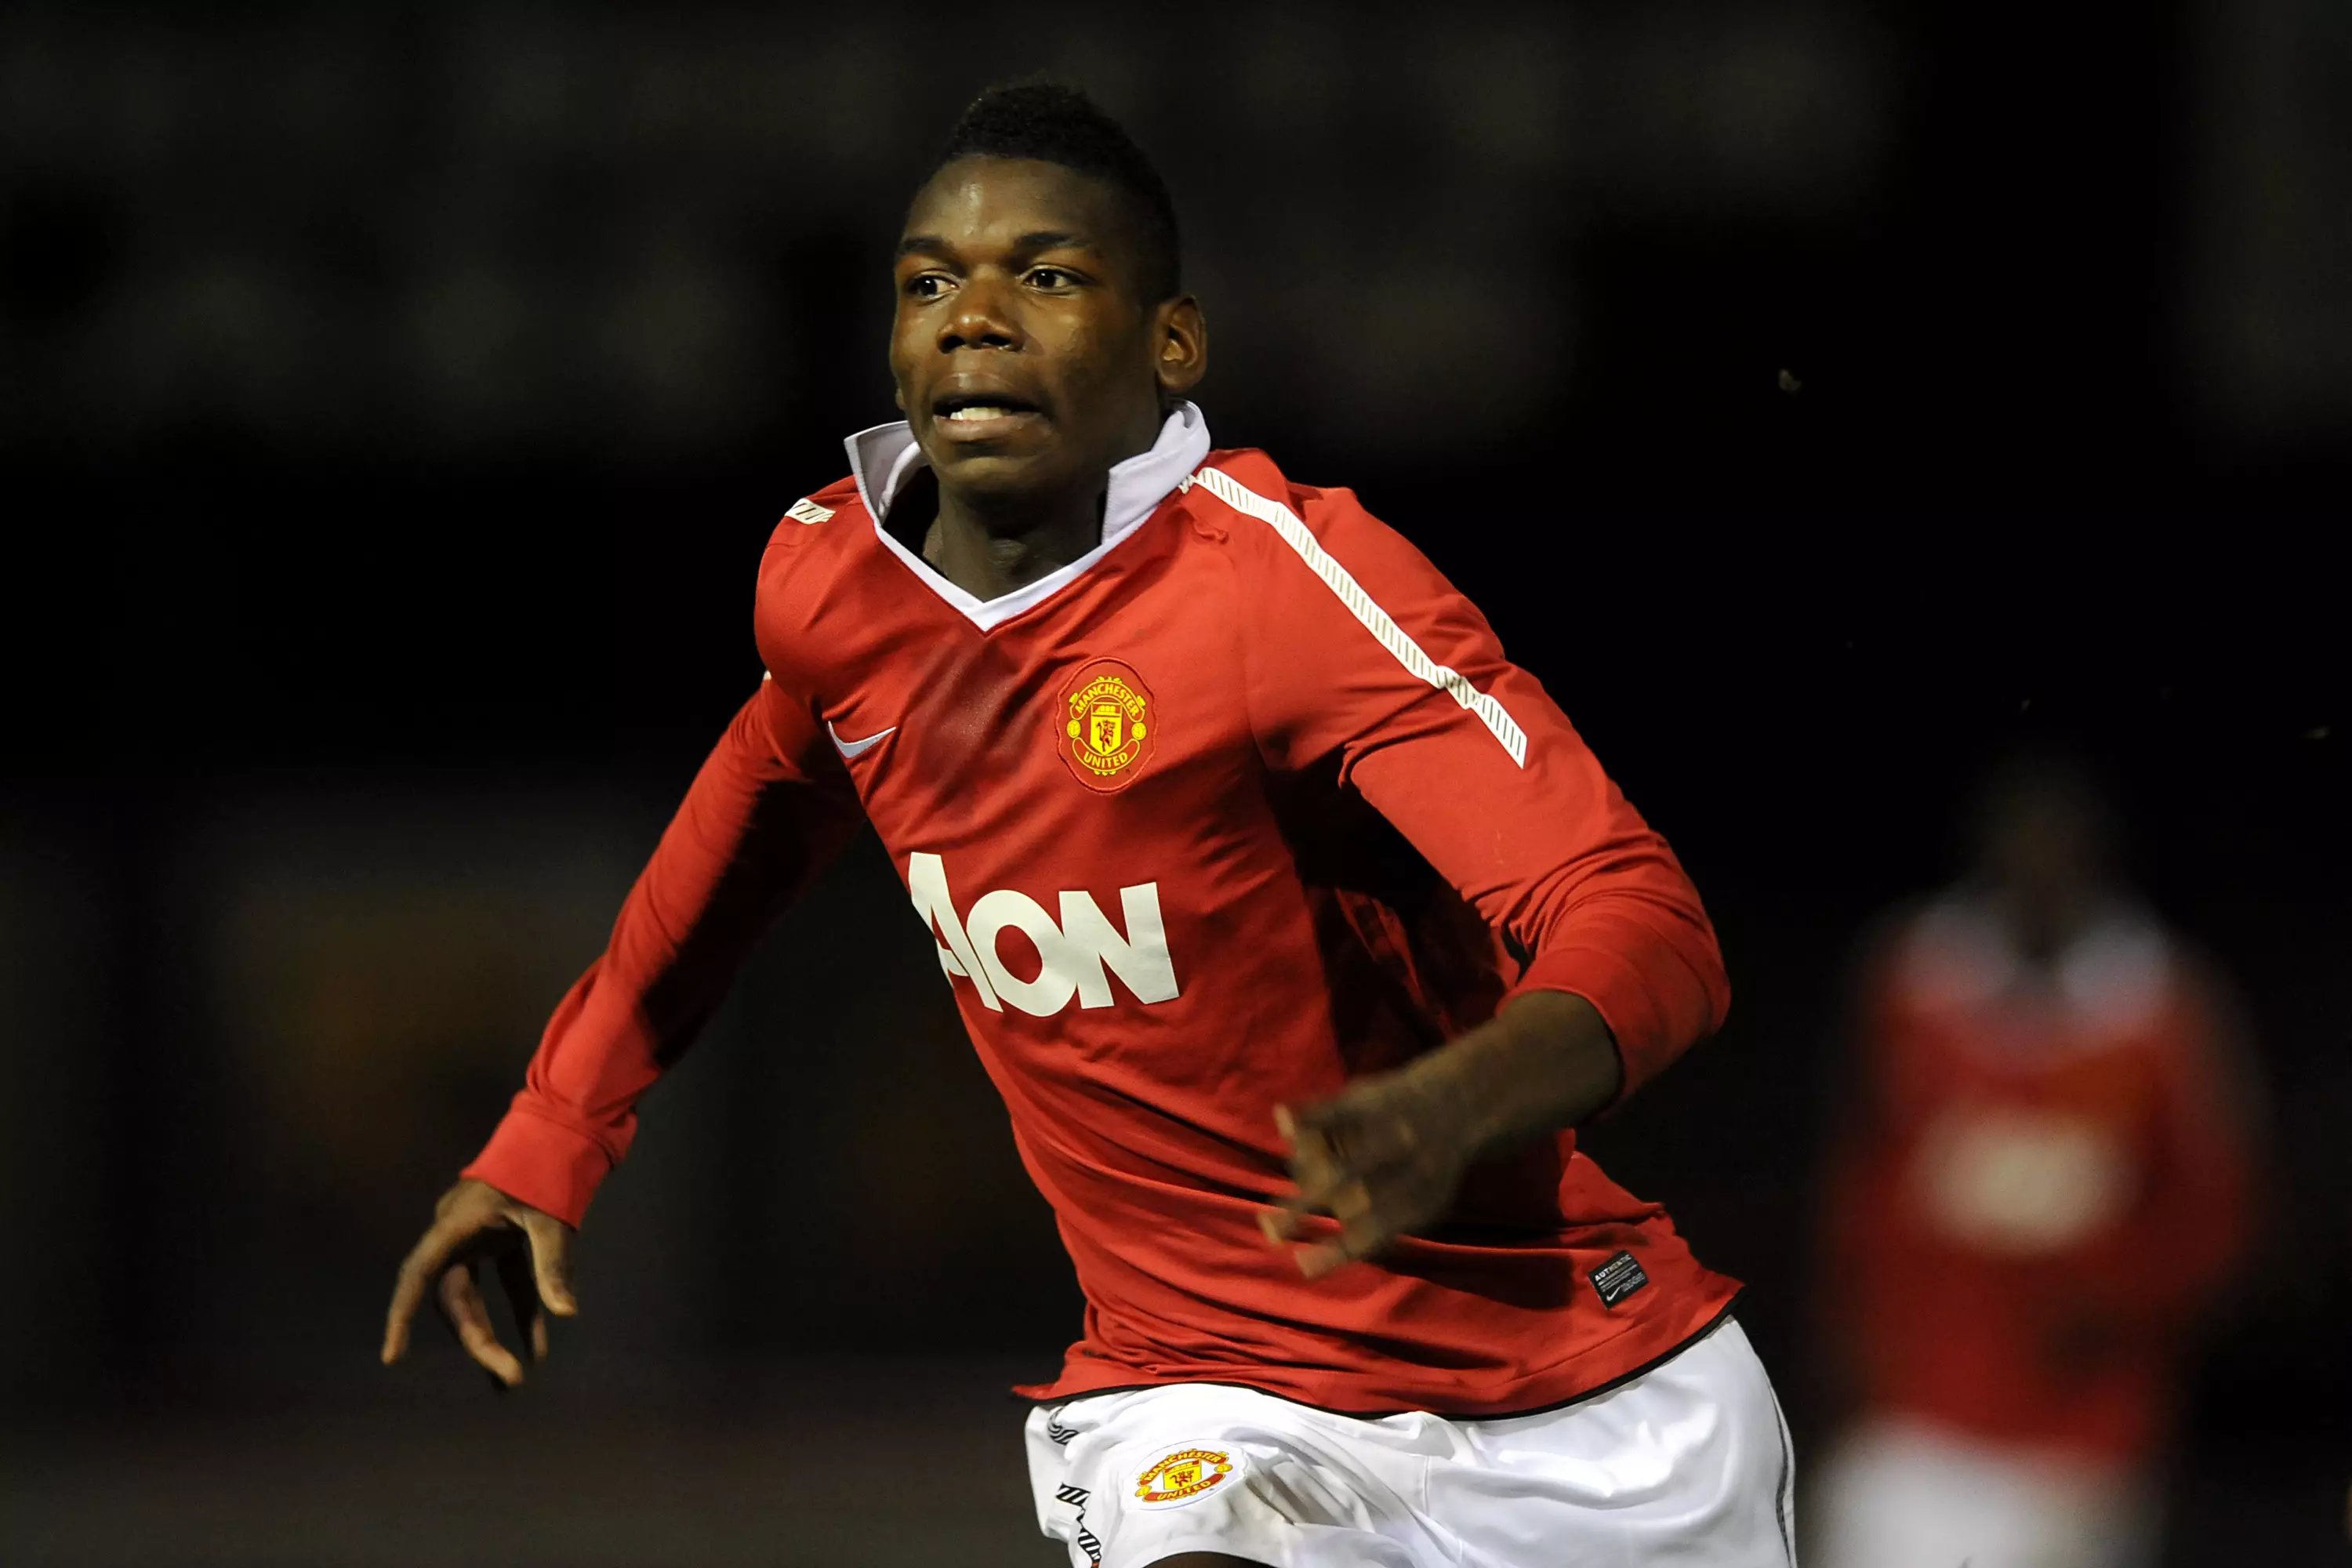 Pogba playing for the club's youth team during his first stint at United. Image: PA Images